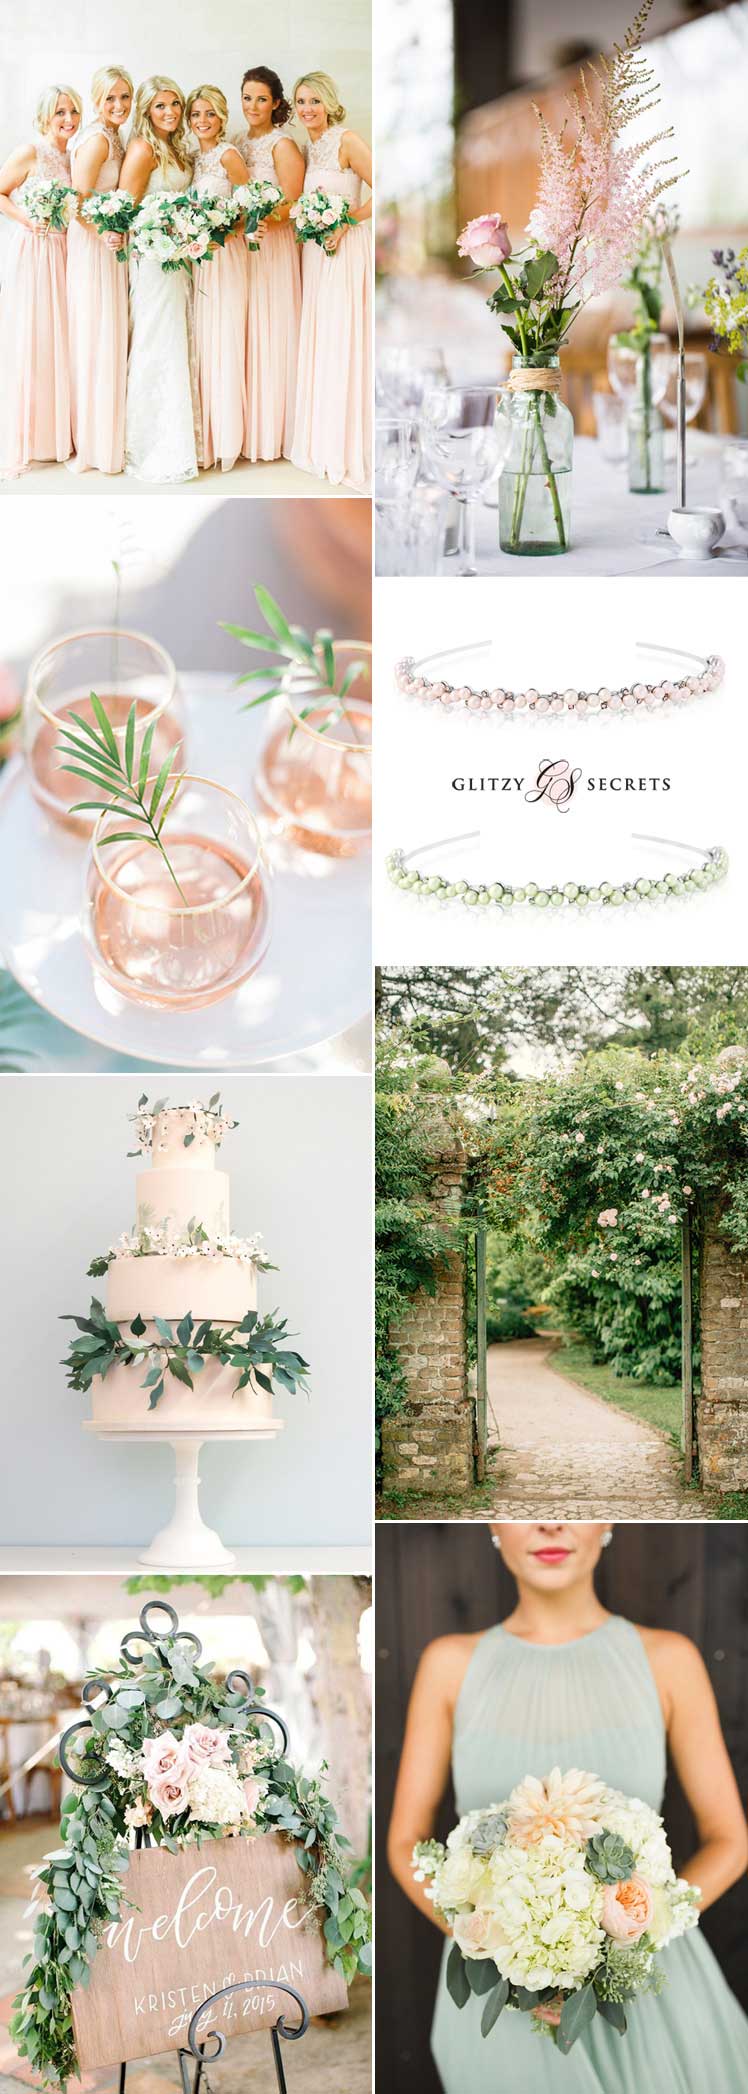 Pastel pink and green wedding inspiration ideas